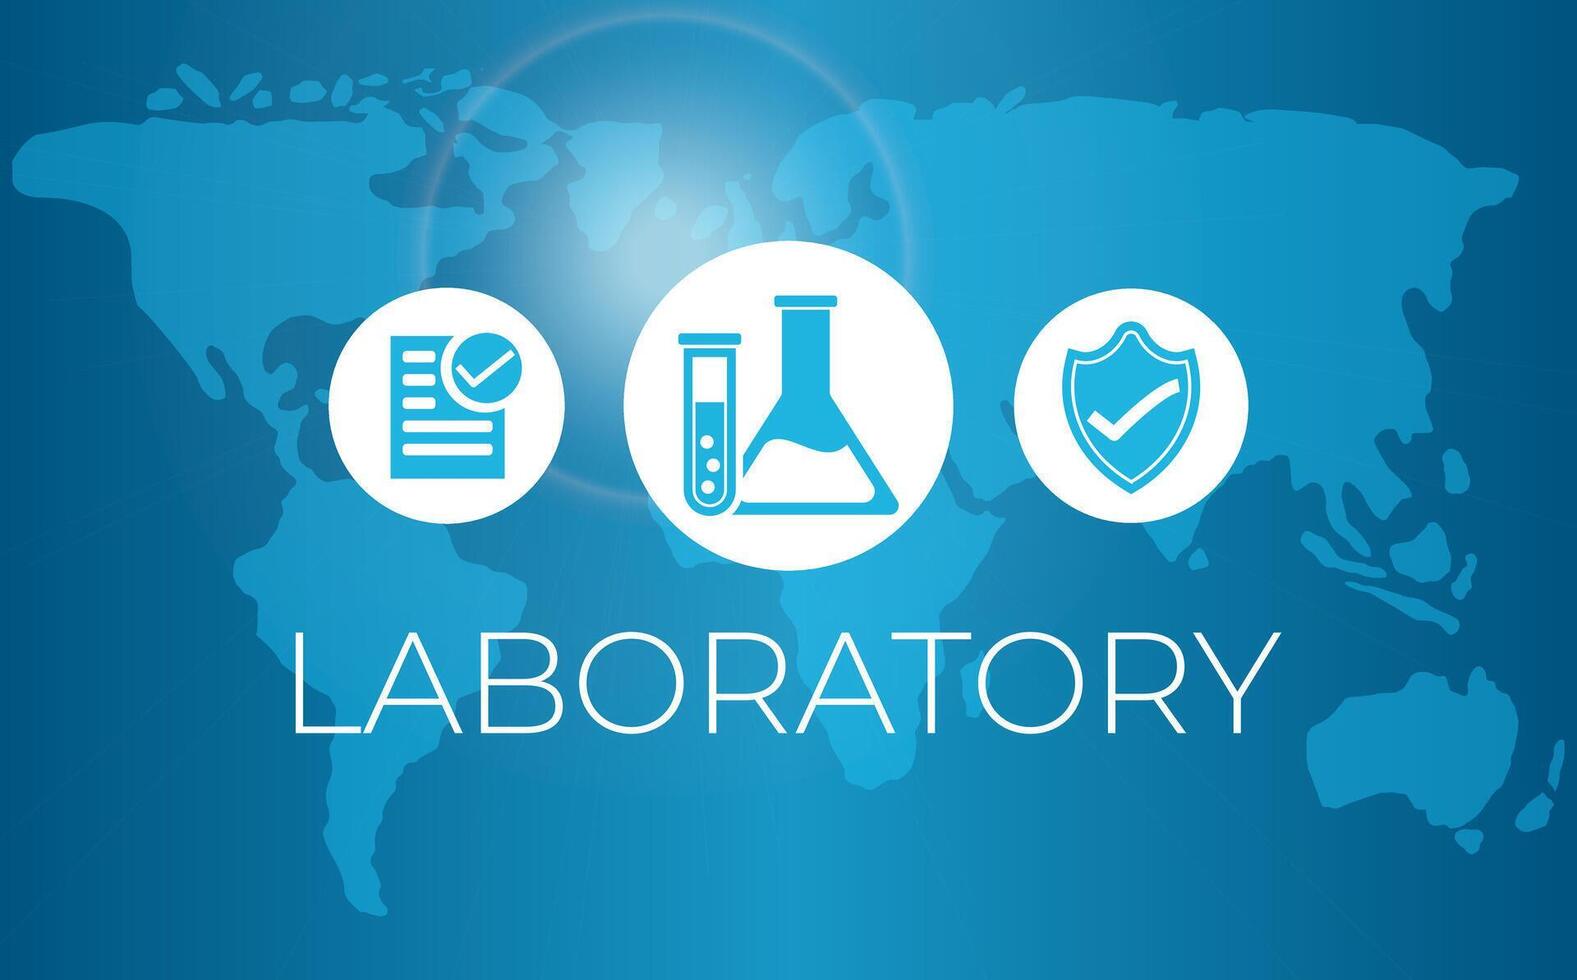 Laboratory Background Illustration with World Map vector